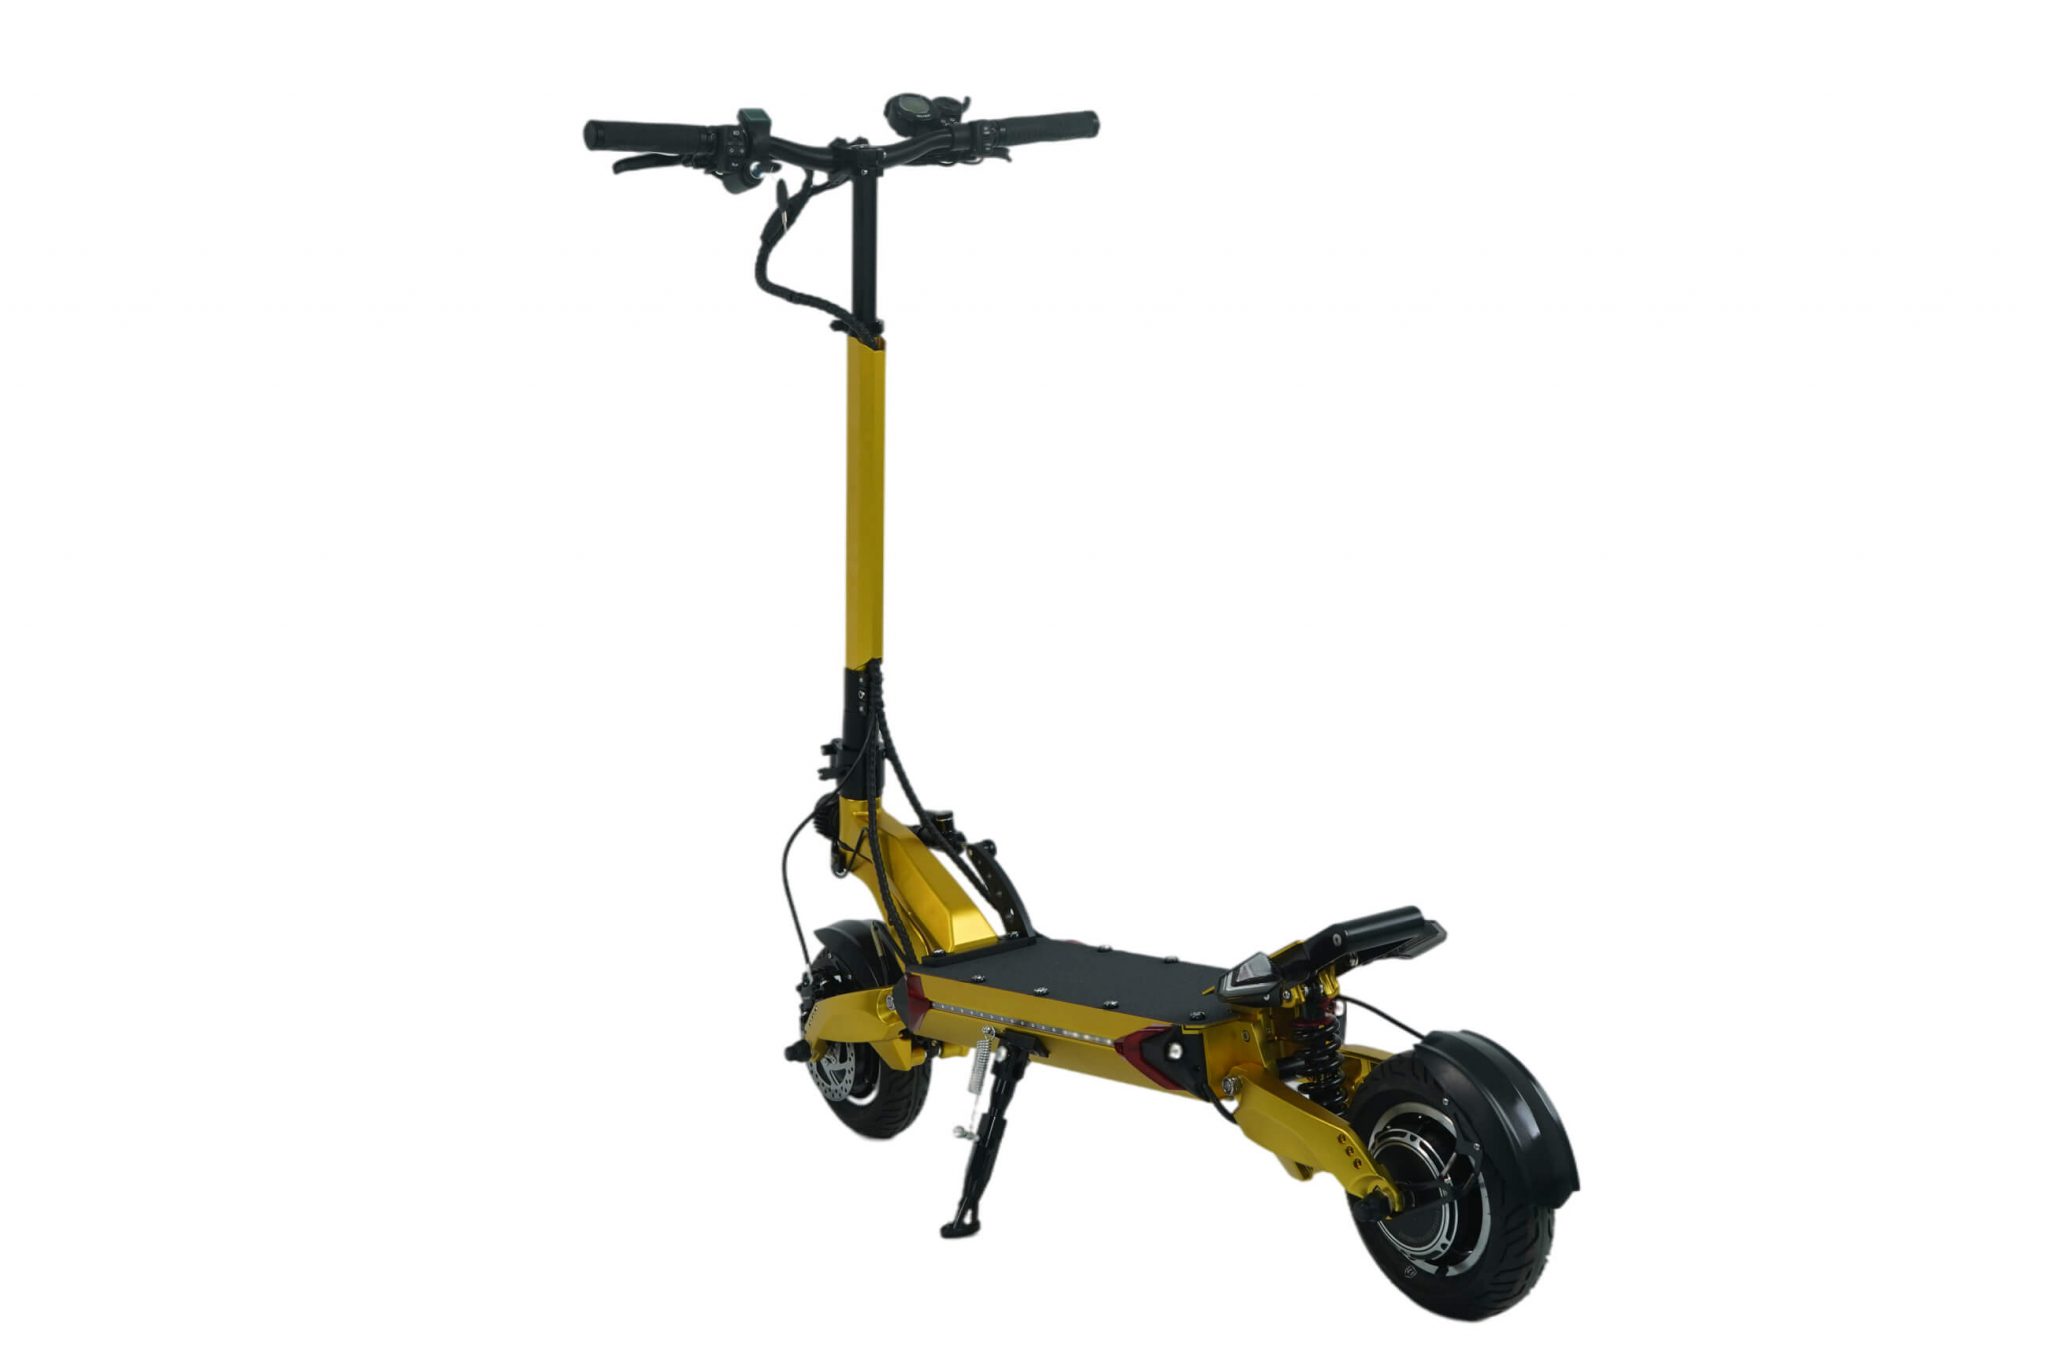 blade limited 10 inch 60V electric scooter gold color rear 2